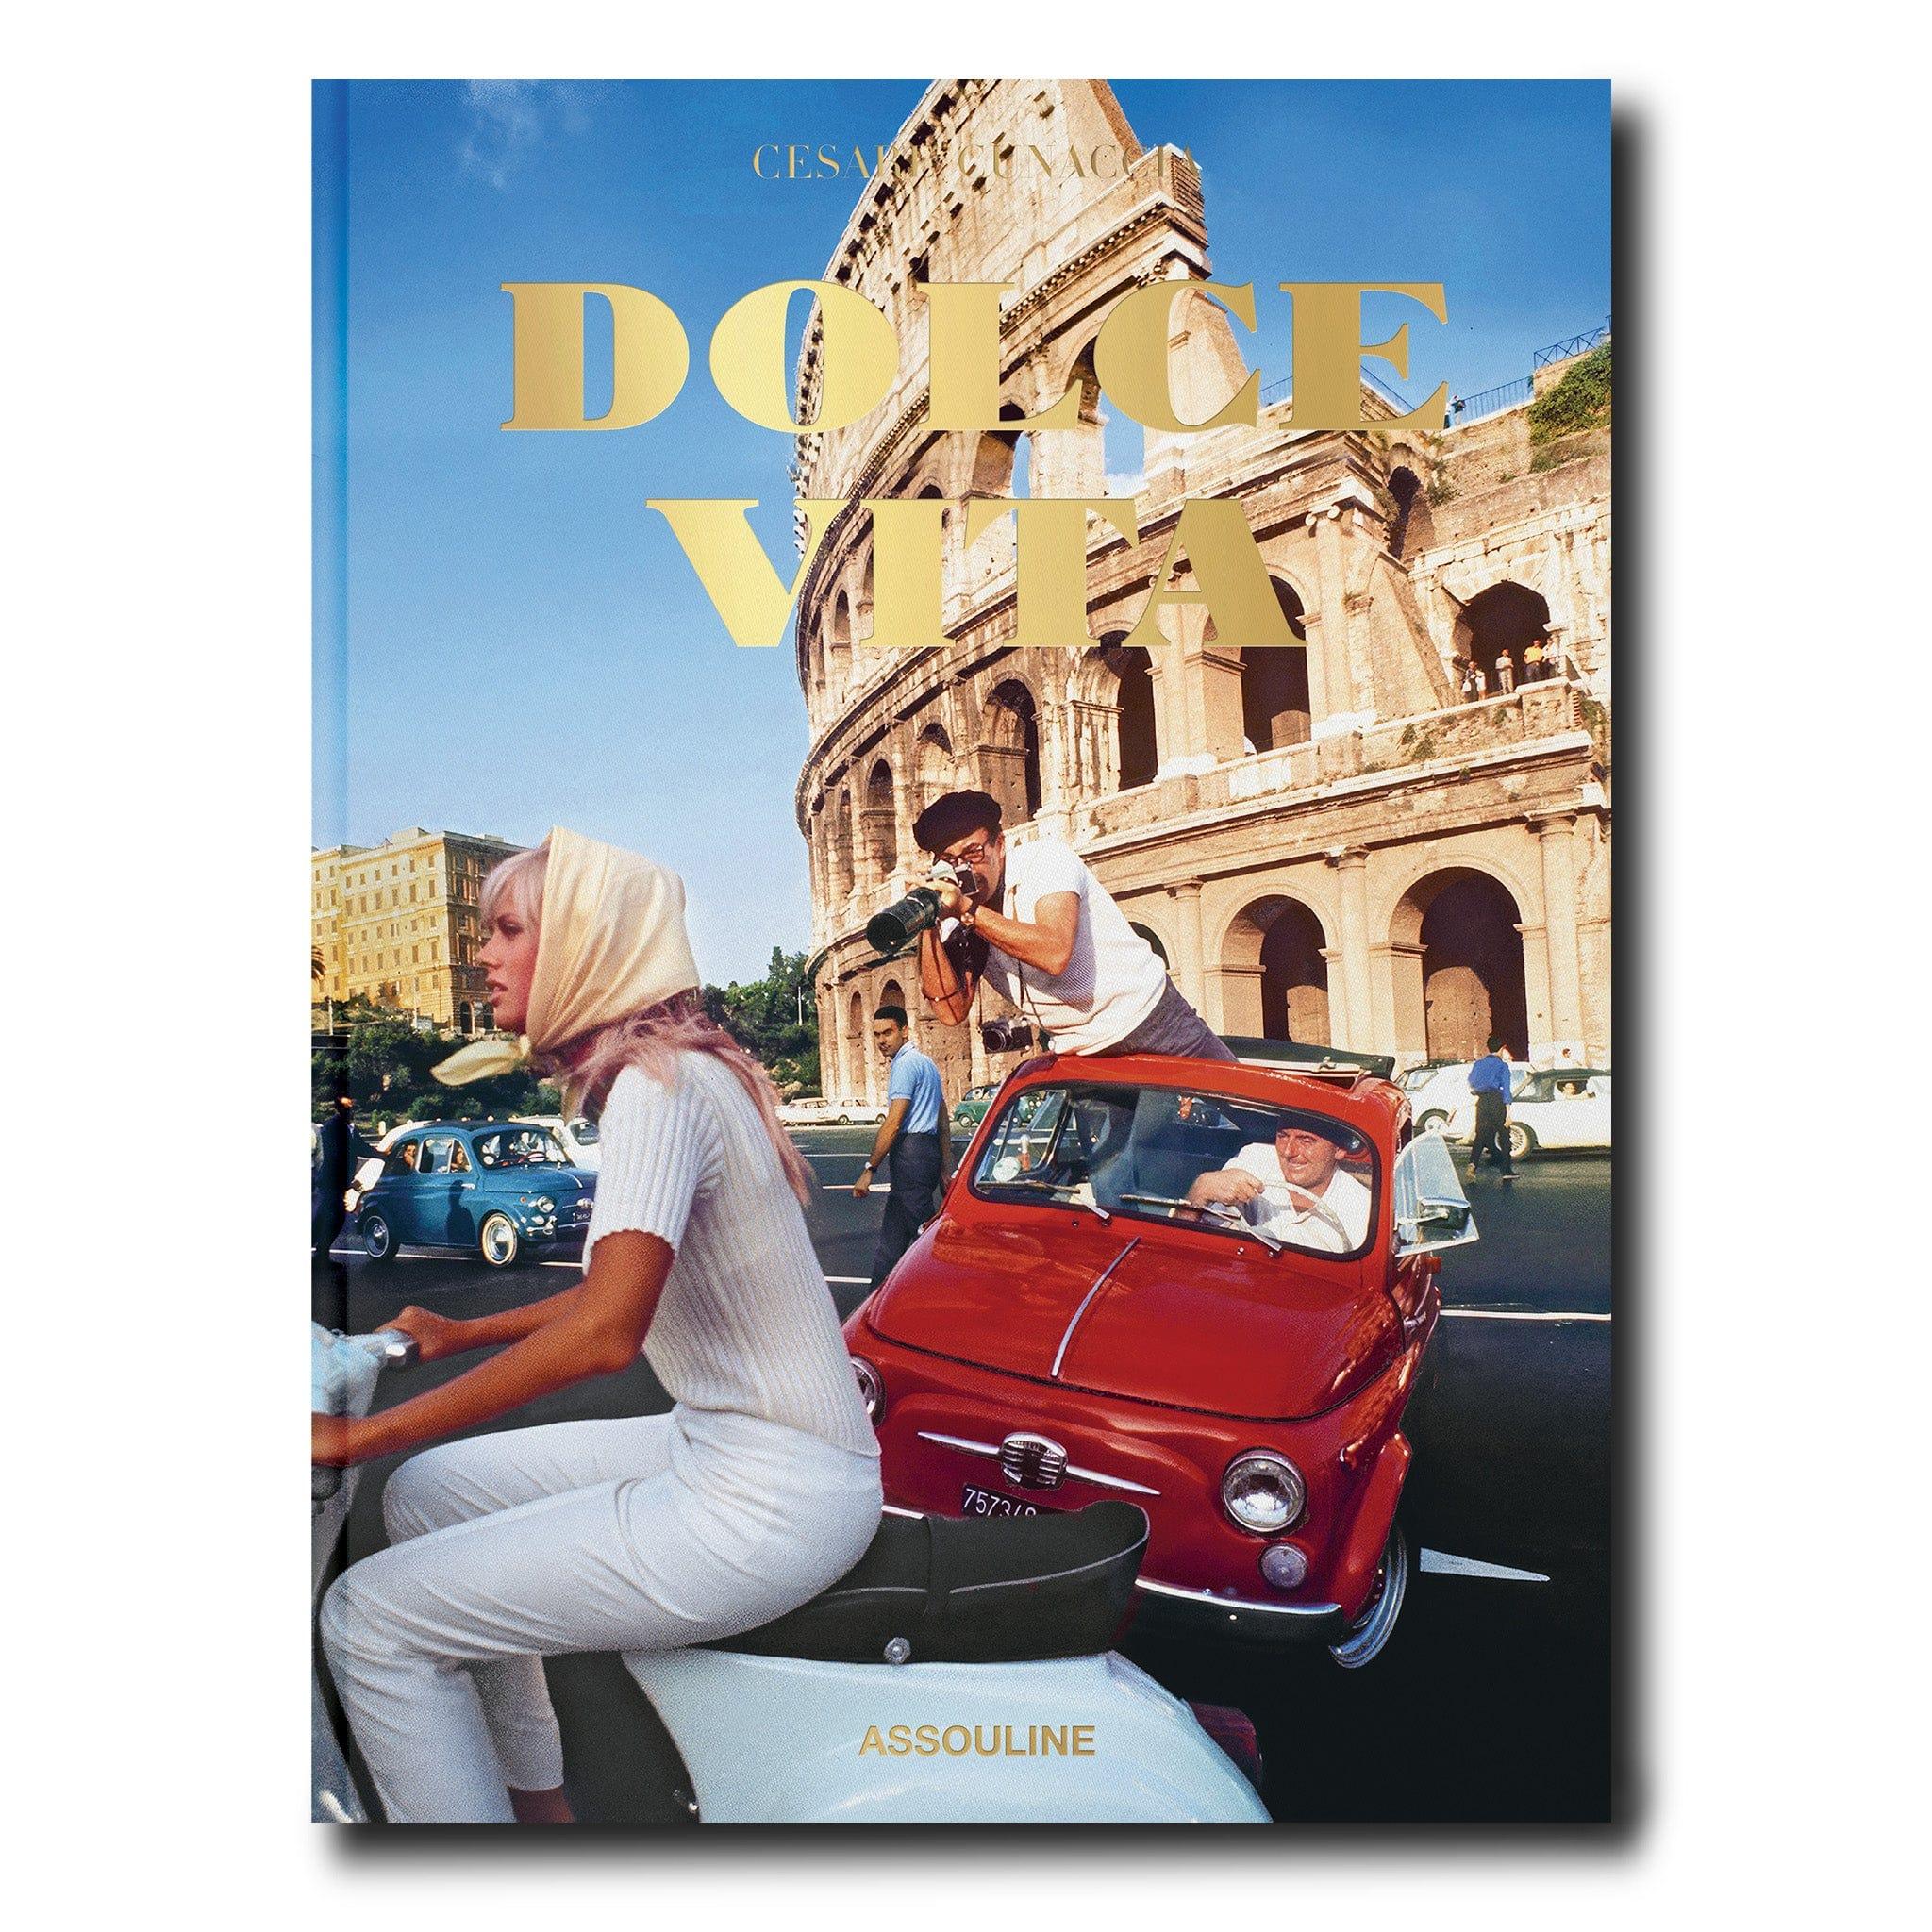 Experience the Dolce Vita lifestyle – a blend of beauty, style, and charm, inspired by Federico Fellini's iconic 1960 film. This Italian way of life transcends time and still graces Italy today. Immerse yourself in its irresistible allure, captured